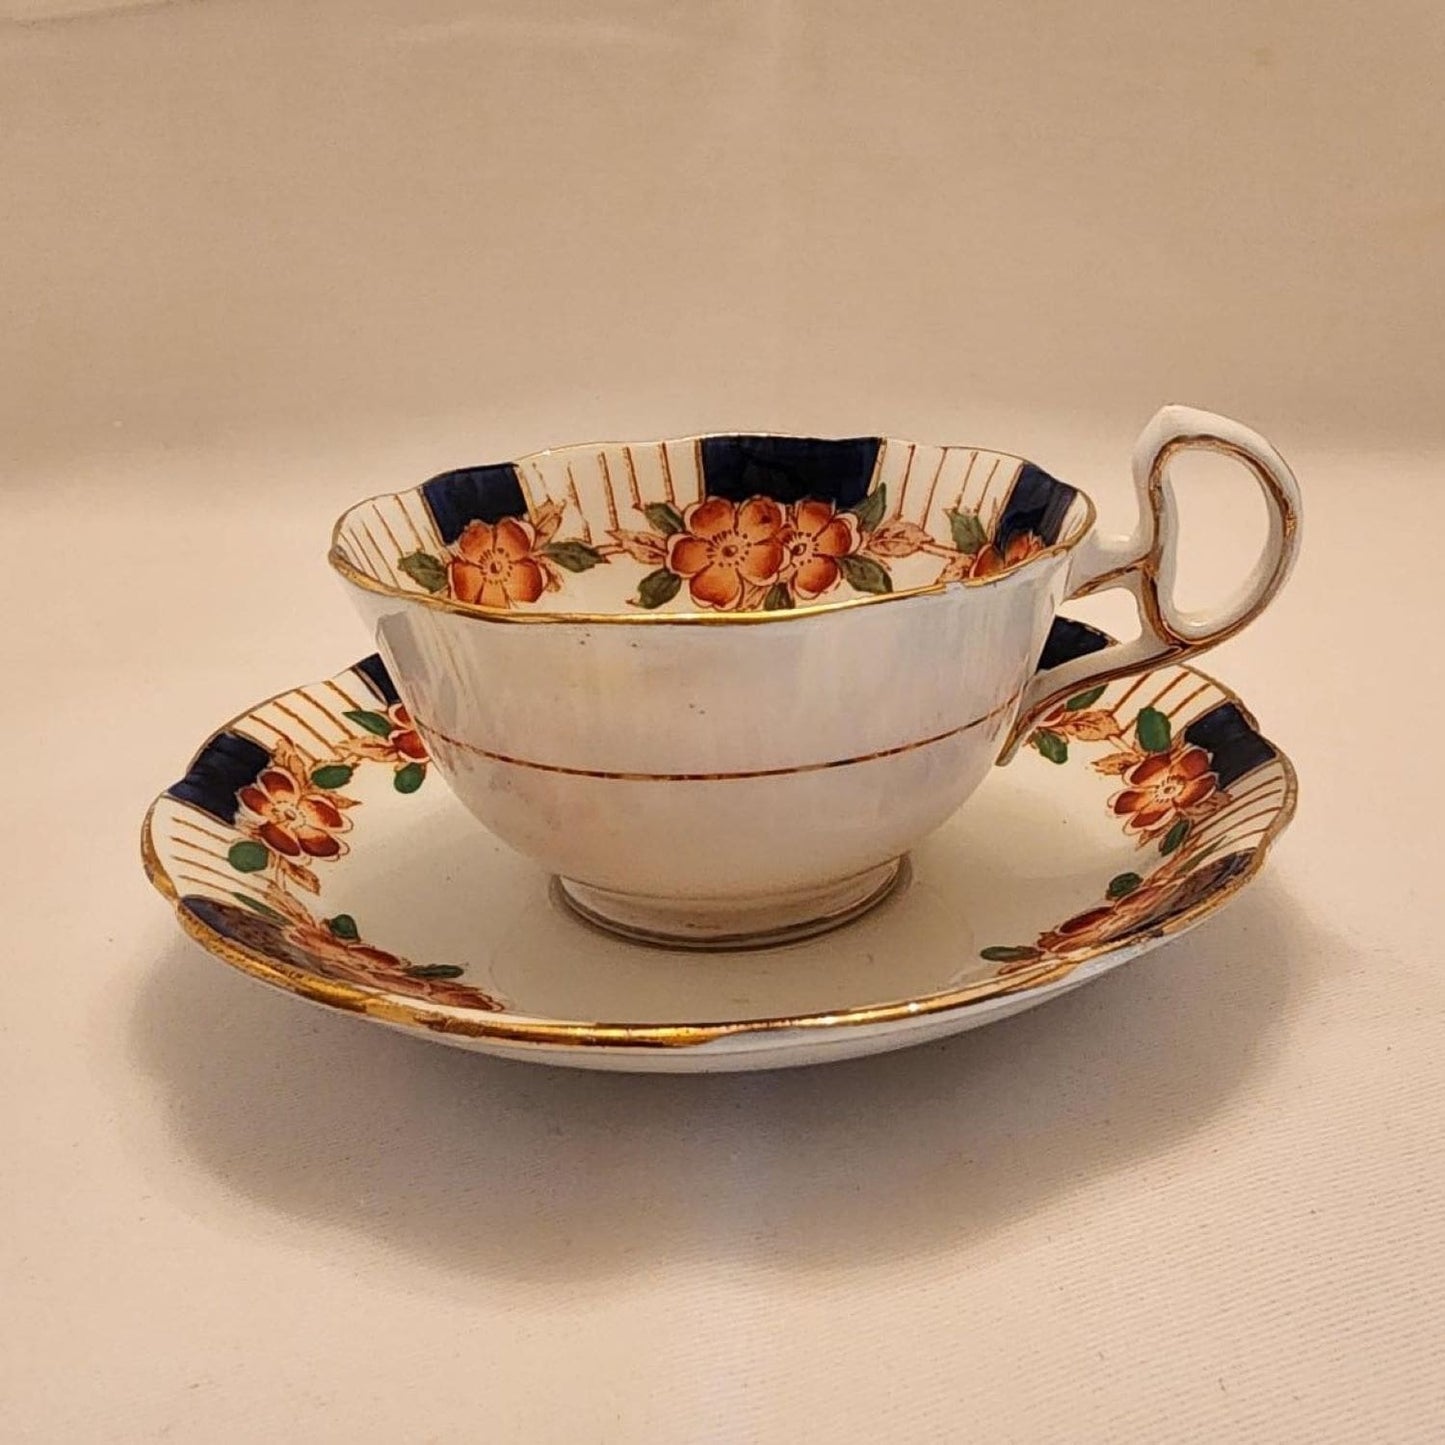 Vintage china cup and saucer featuring floral pattern.